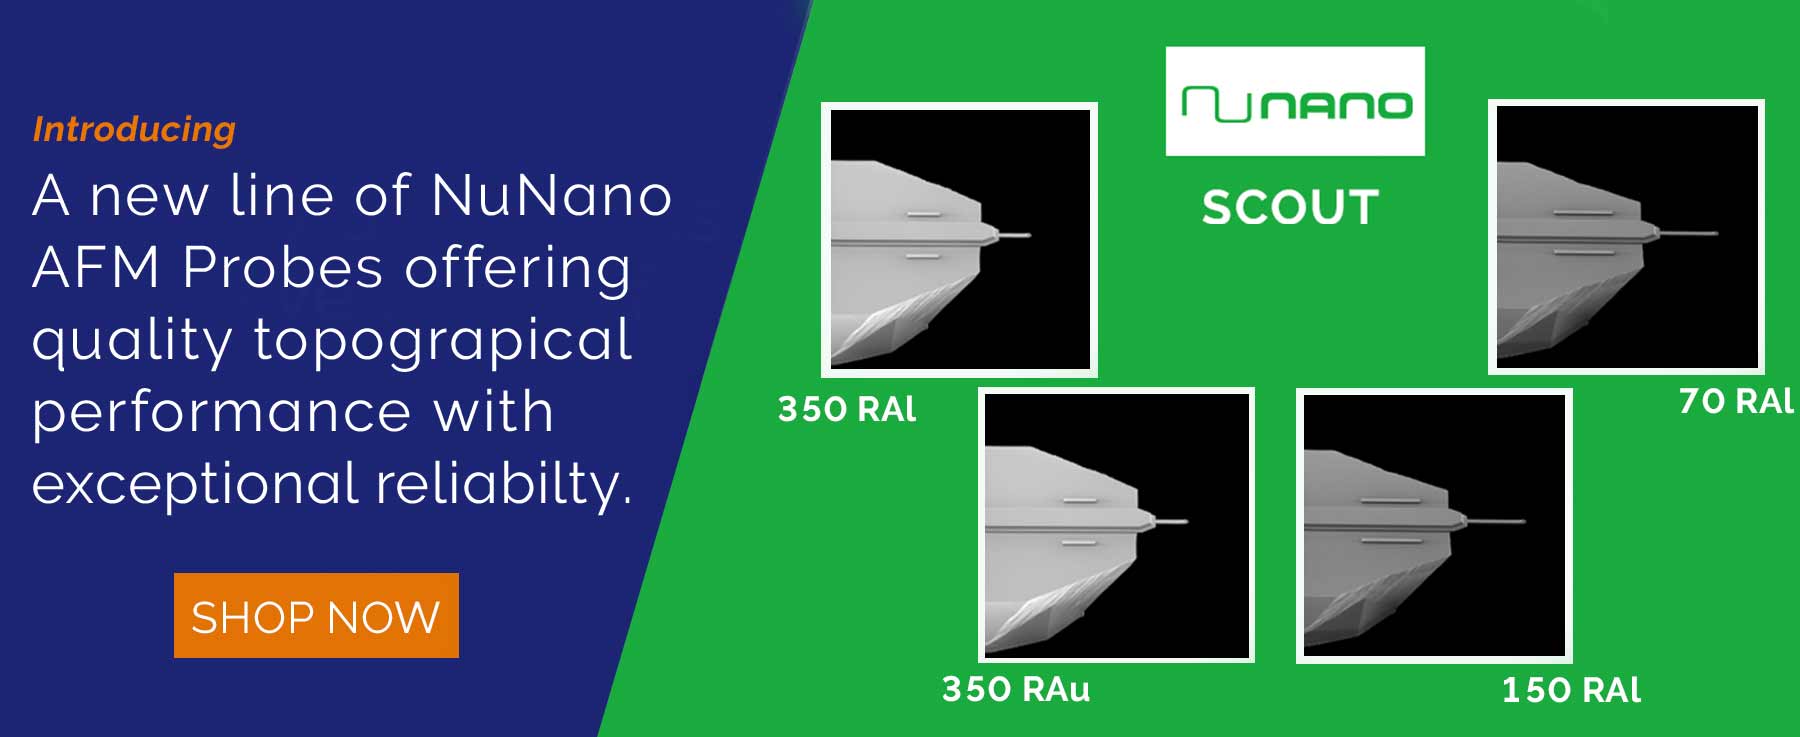 Introducing a new line of NuNano AFM Probes offering quality Nanoelectrical performance...